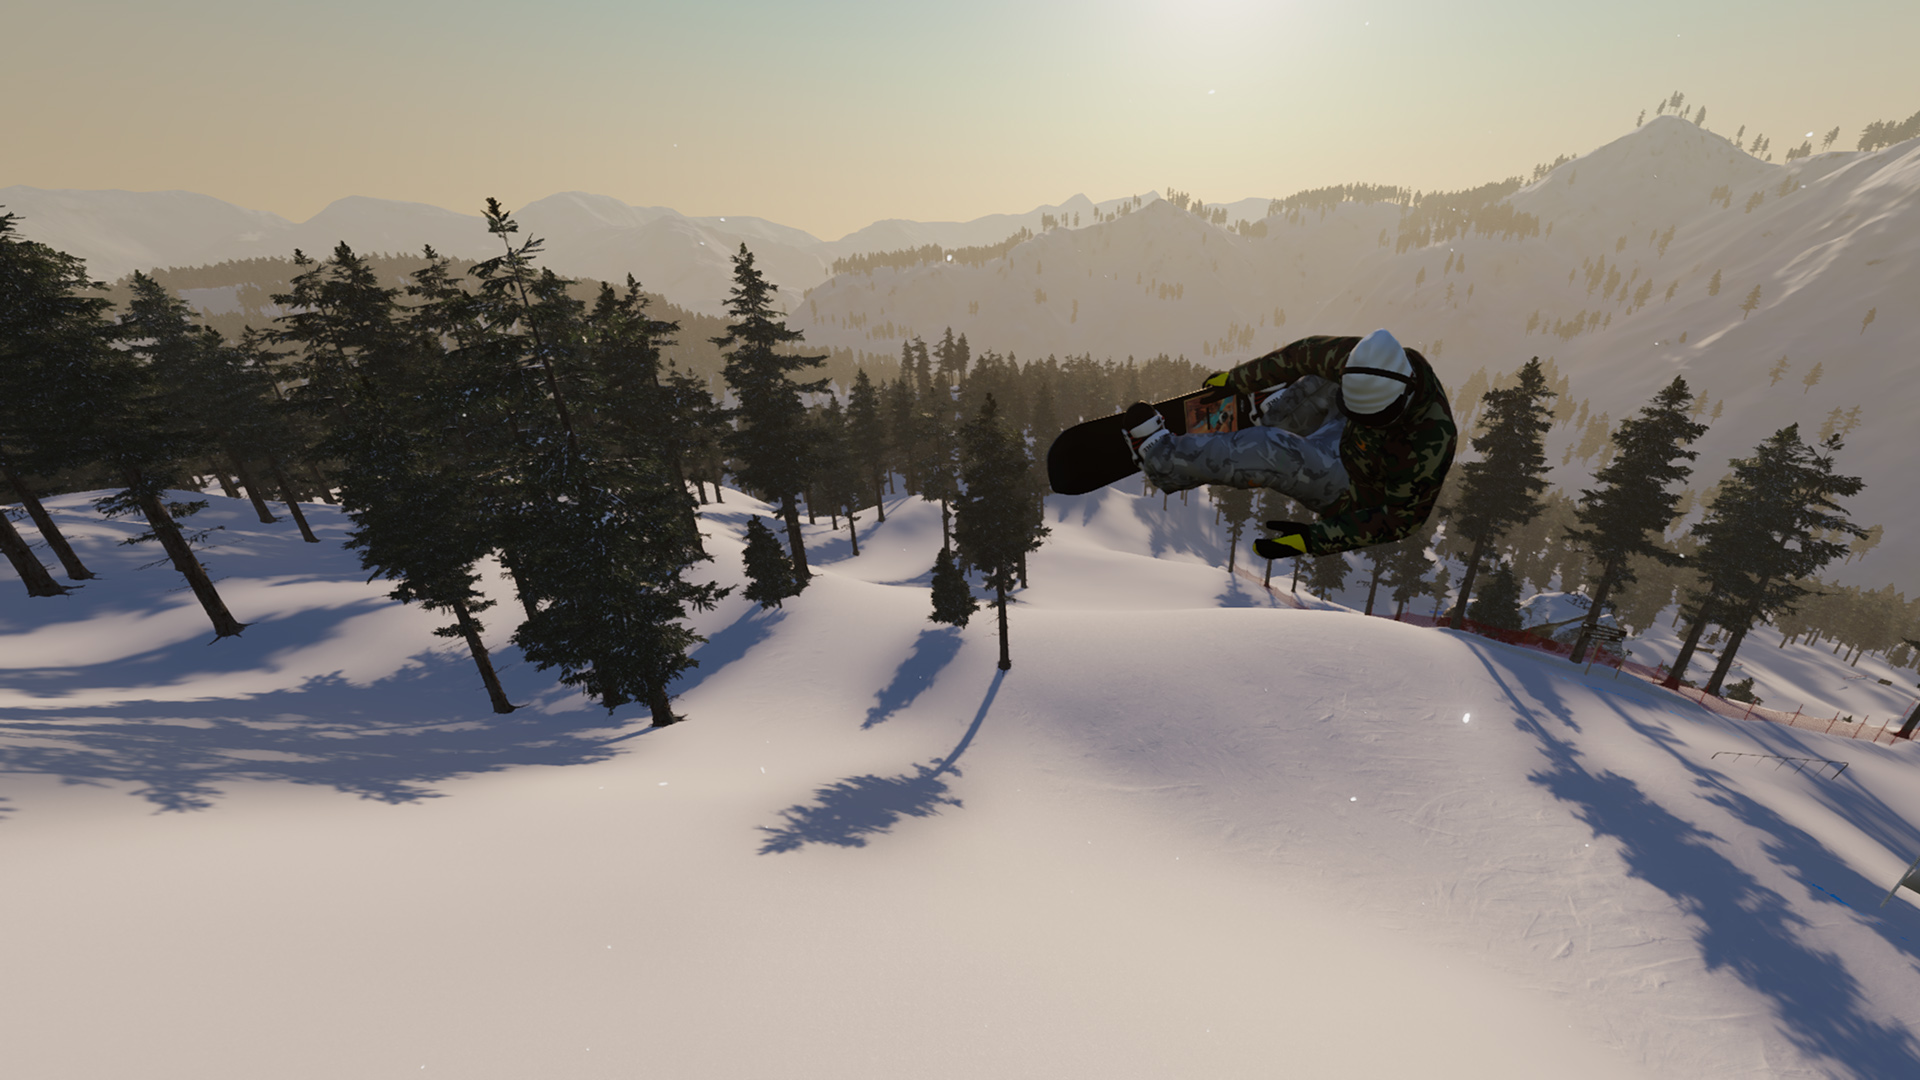 Save 50% on The Snowboard Game on Steam